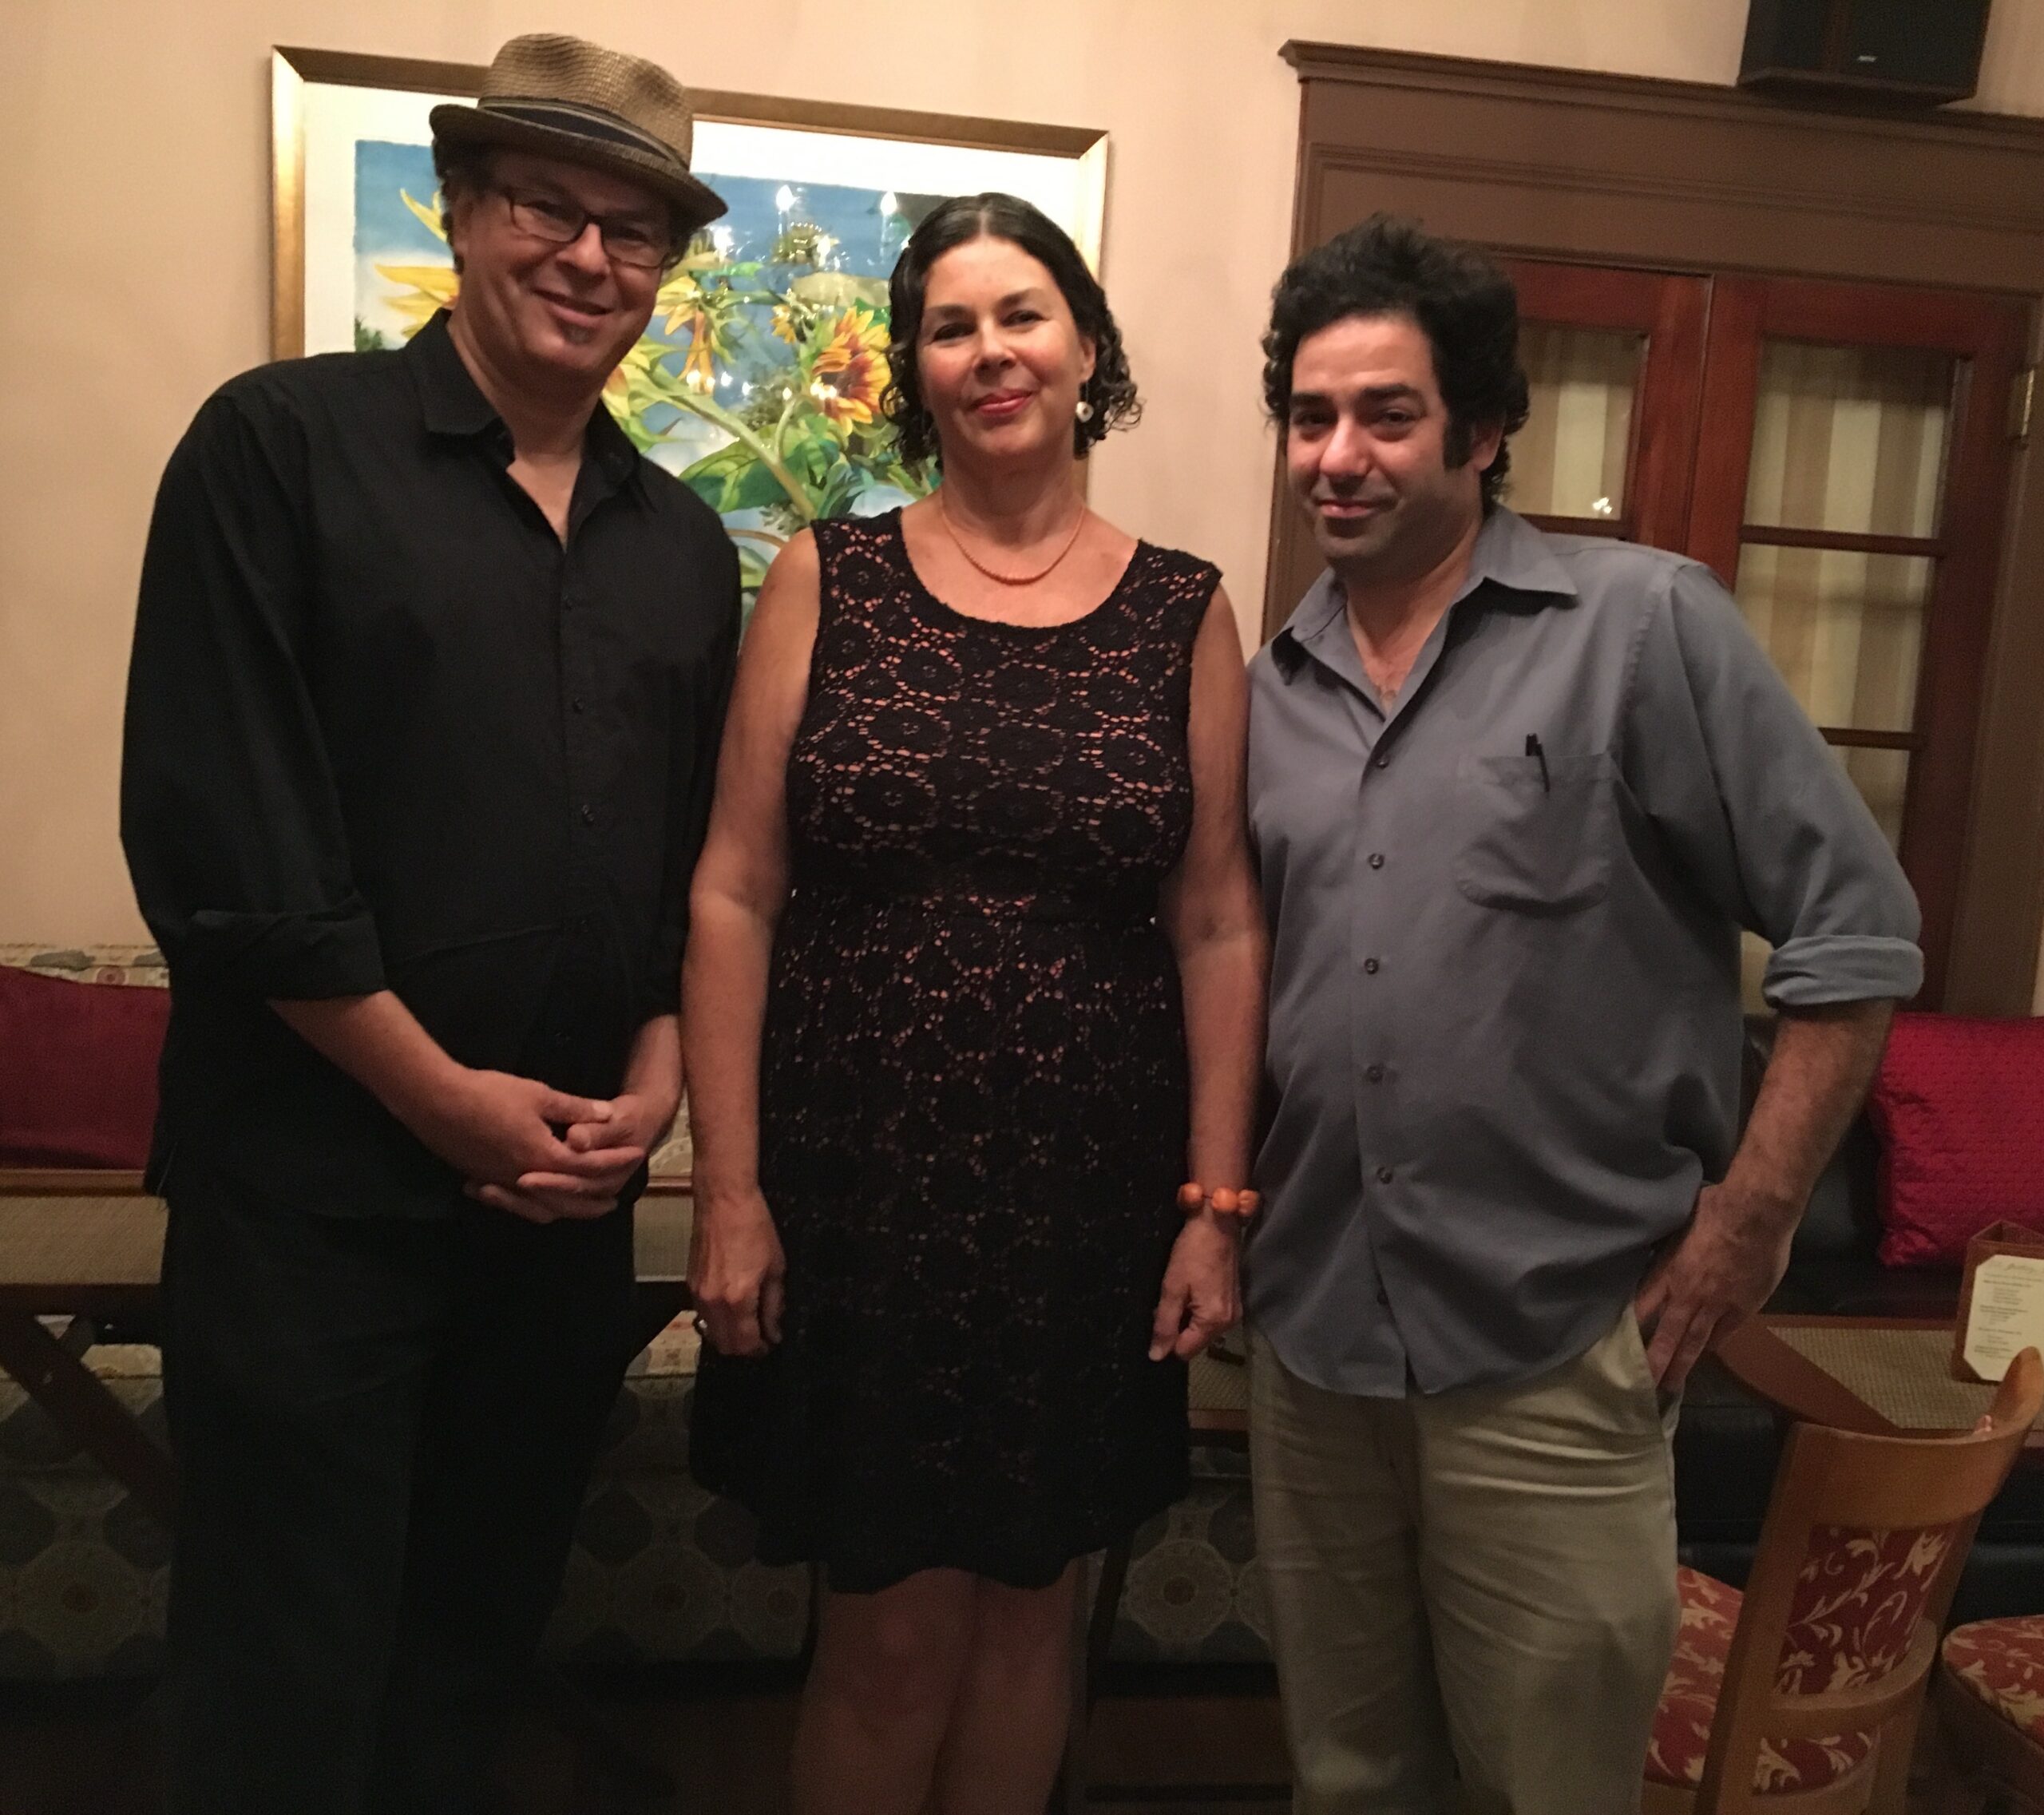 The O-Tones power trio play blues, soul, and swing music private event